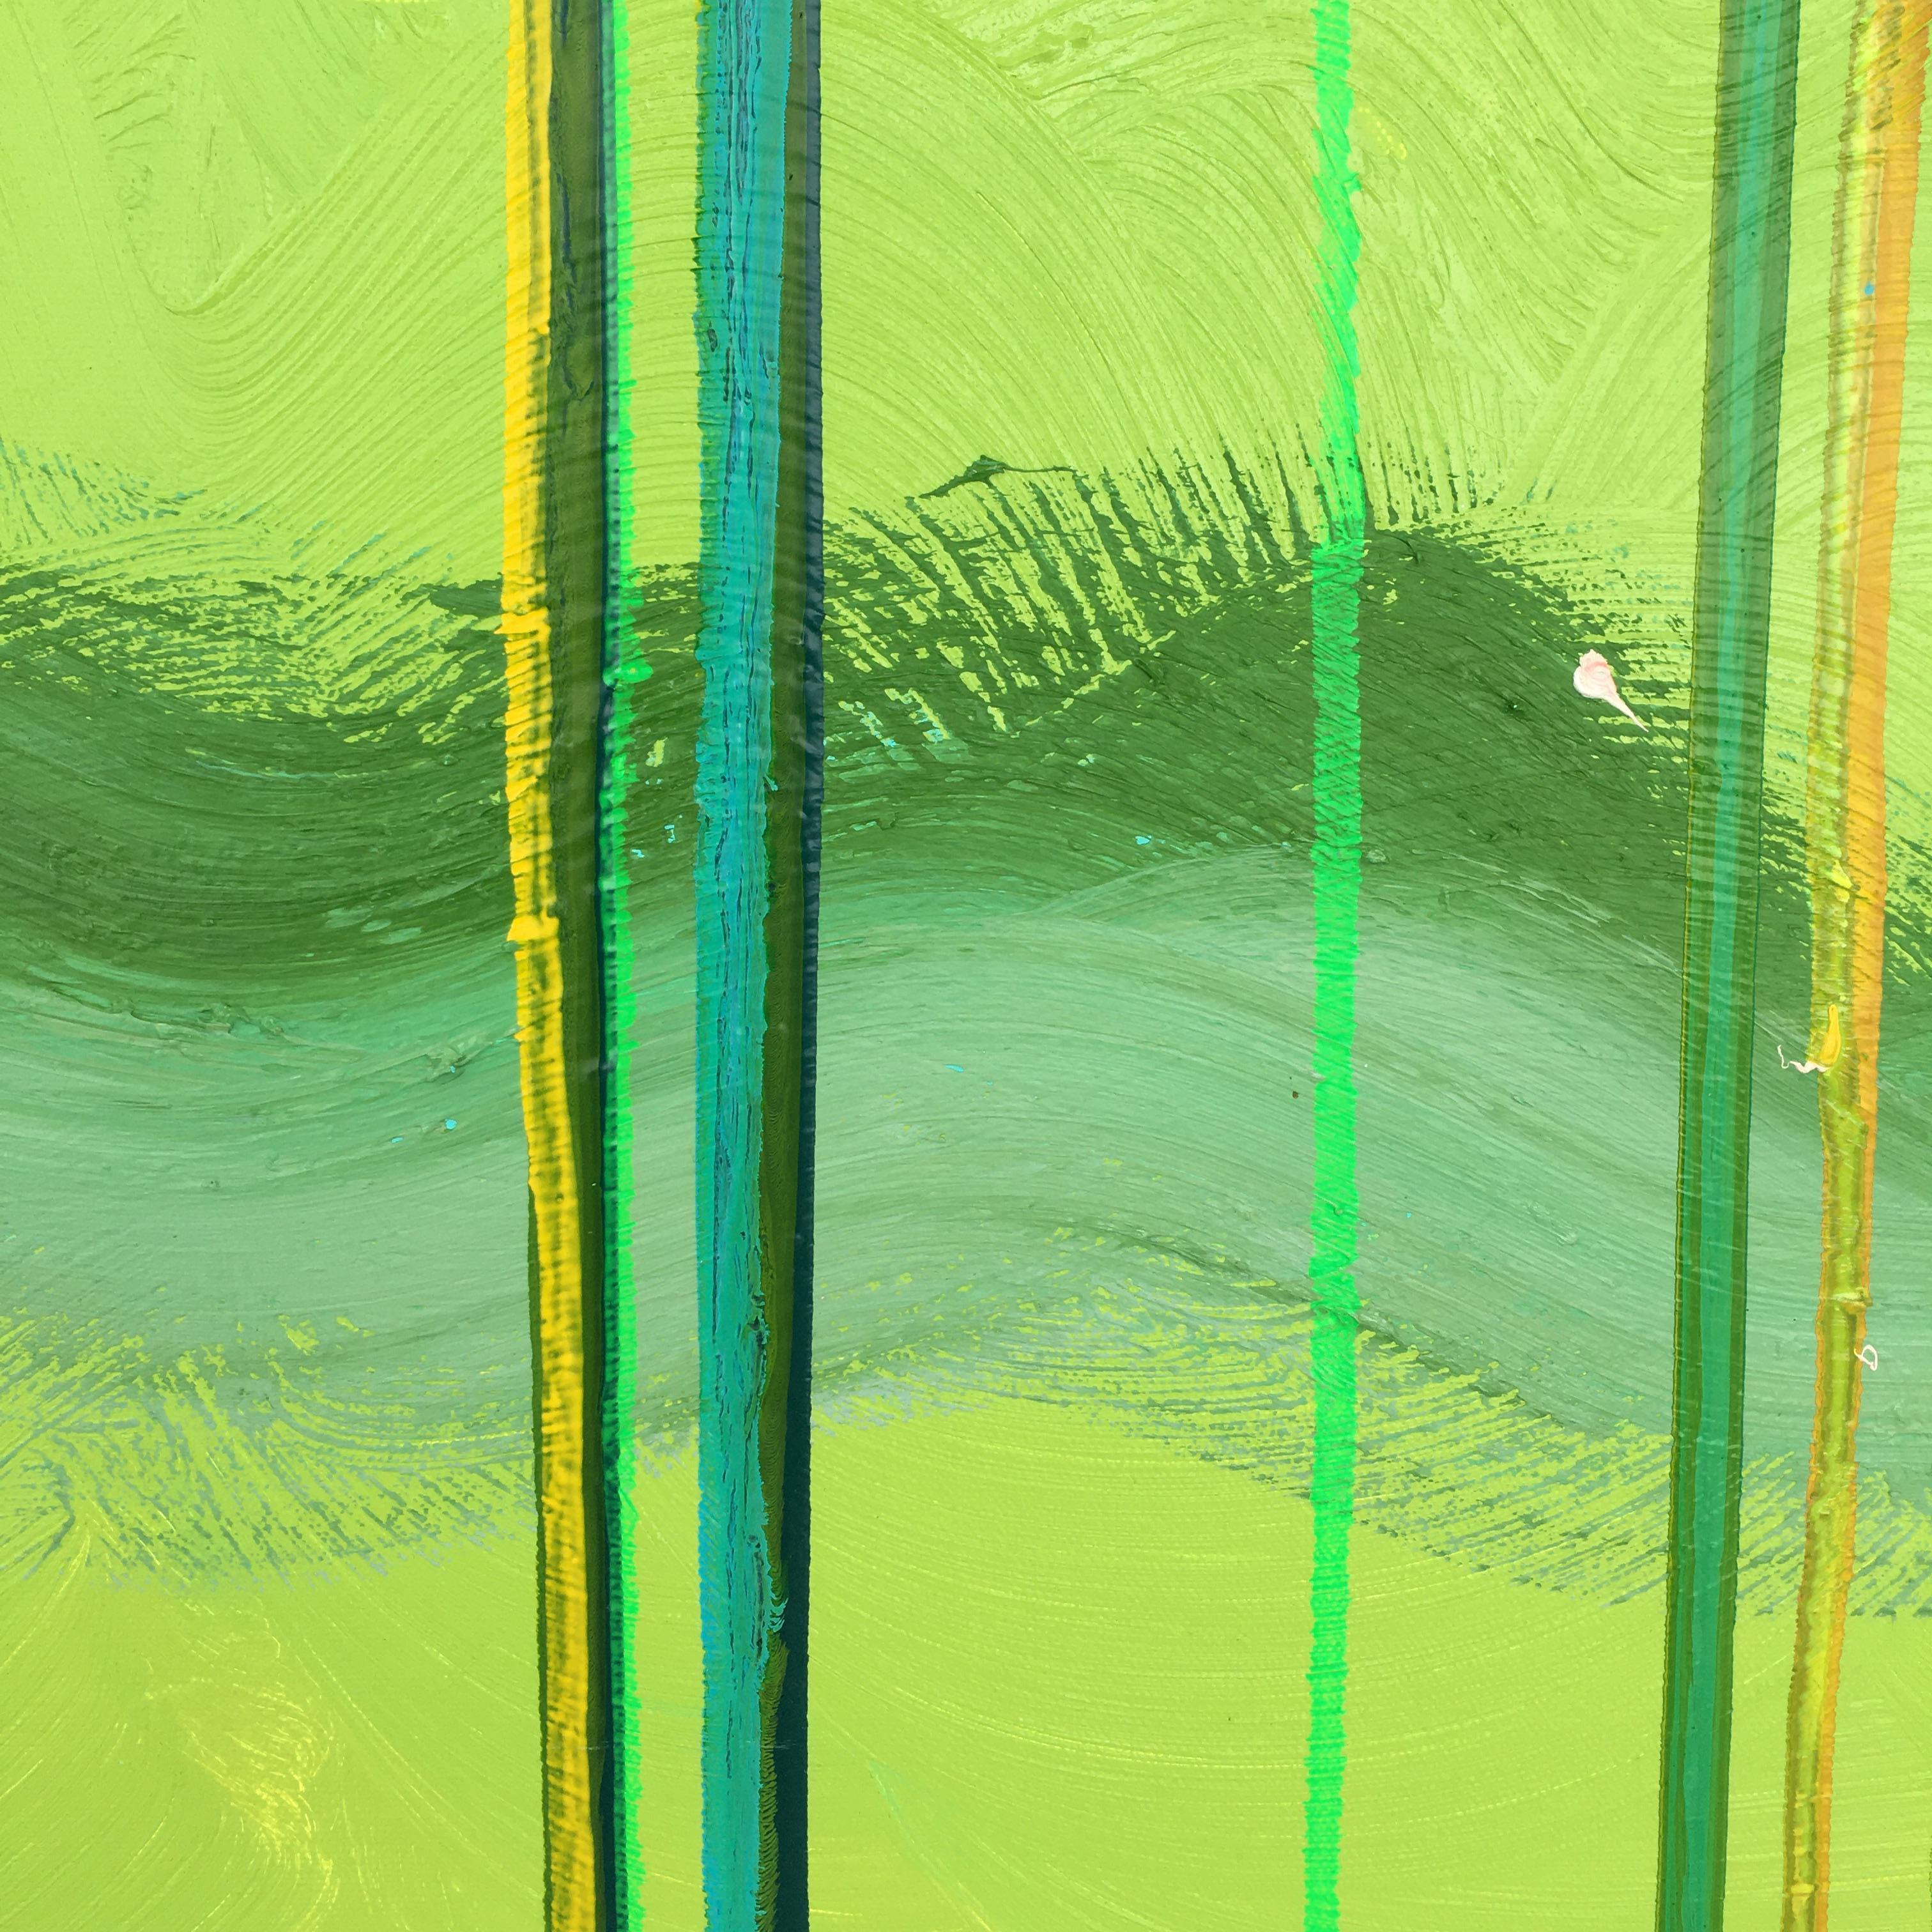 Forest Flood: abstract expressionism oil landscape in green with vertical lines - Painting by Dennis Alter